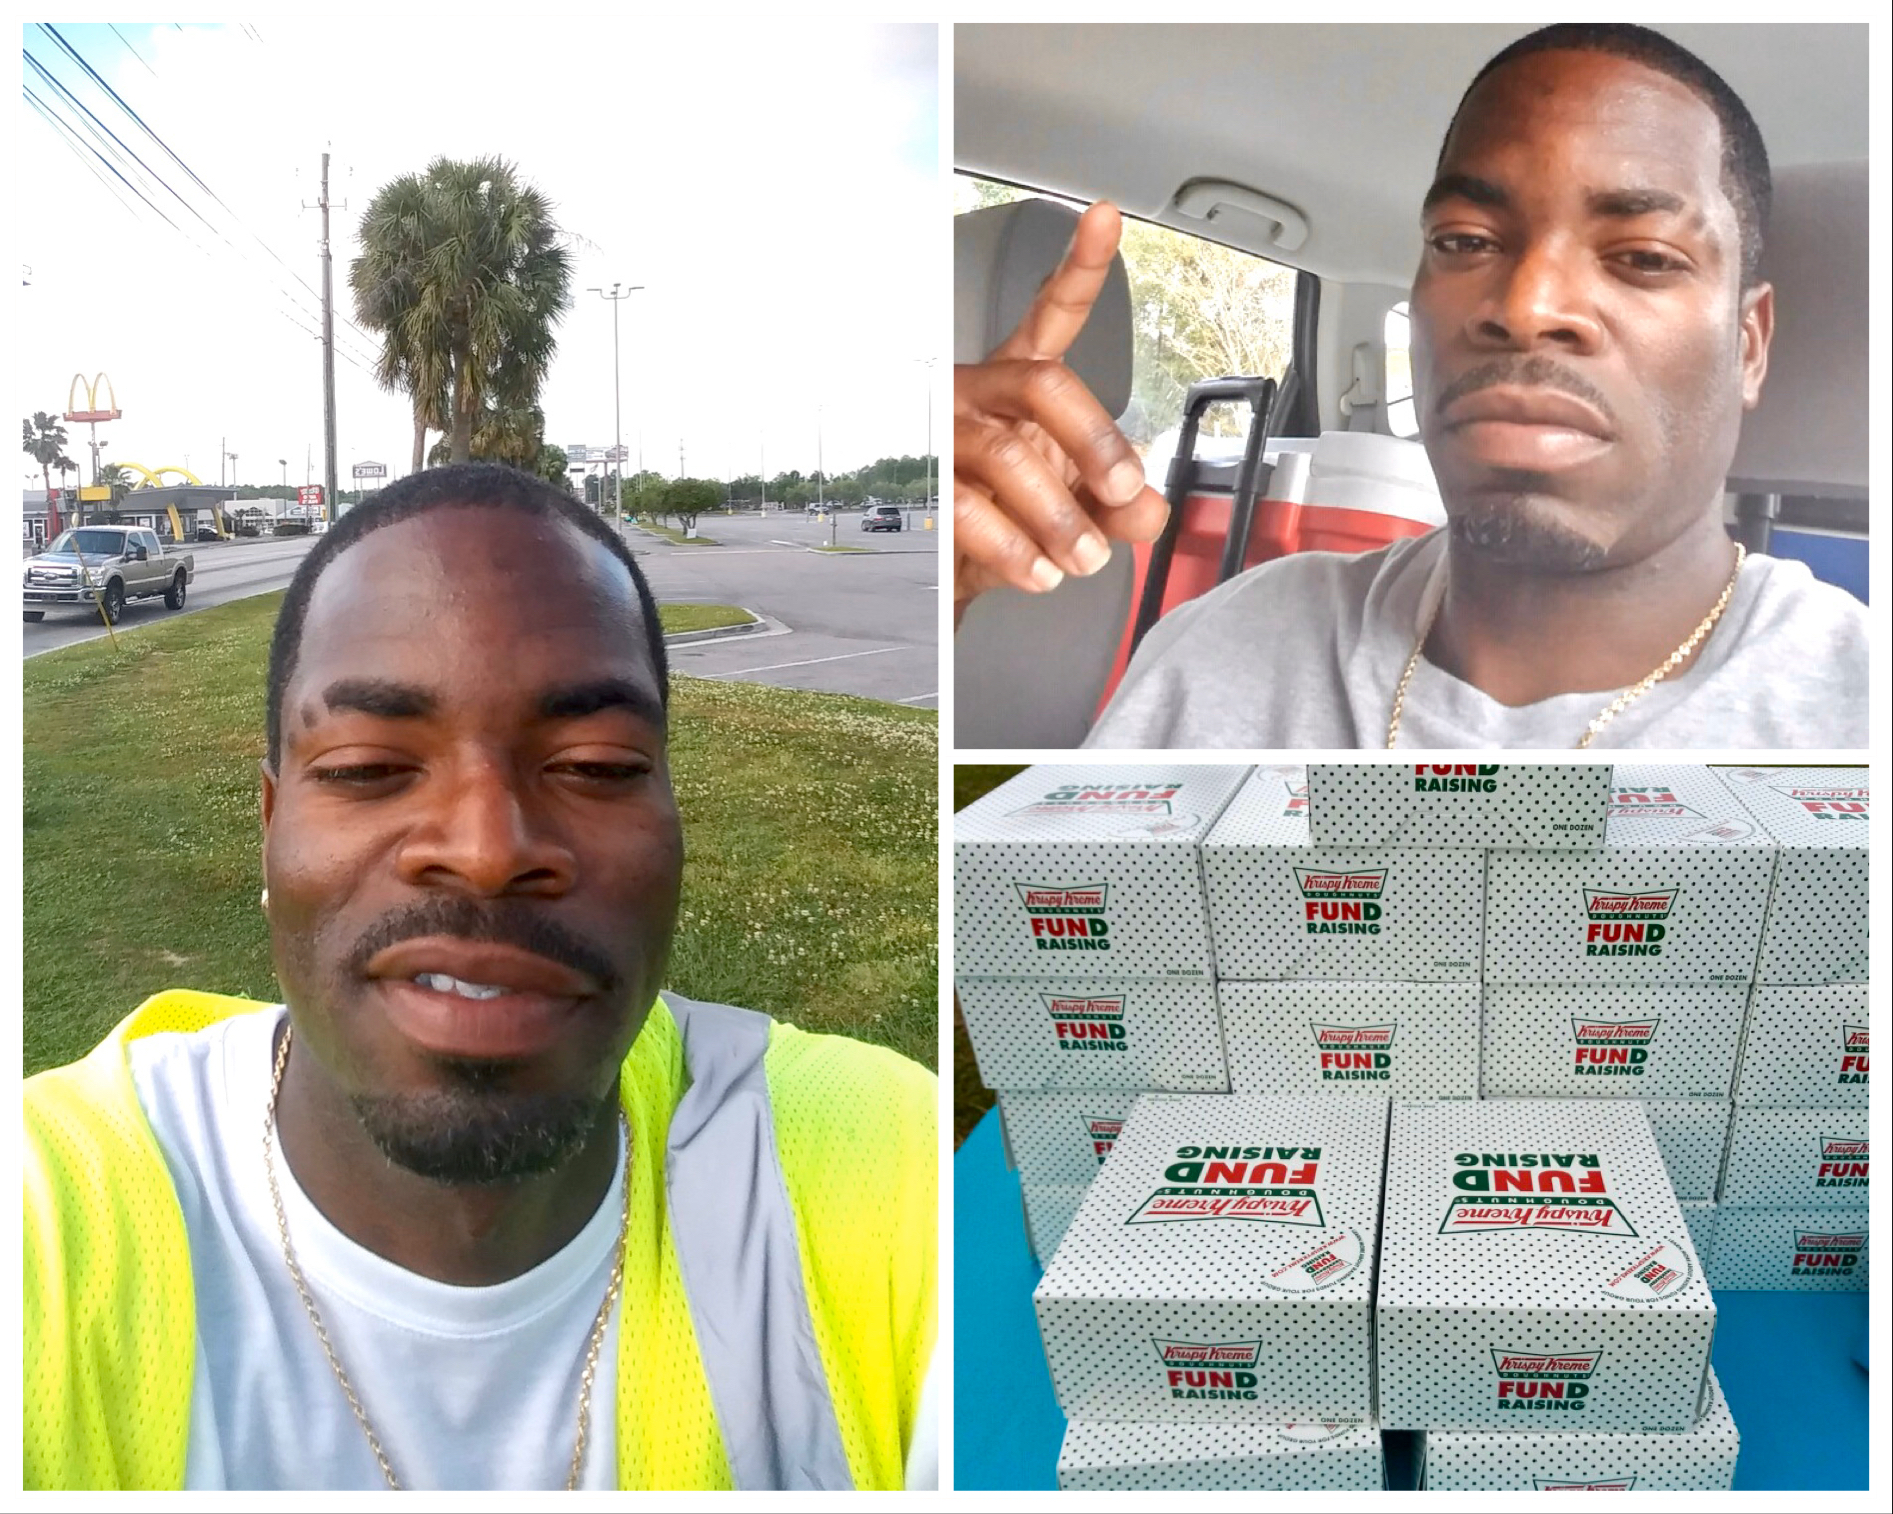 I started selling doughnuts and turned my life around